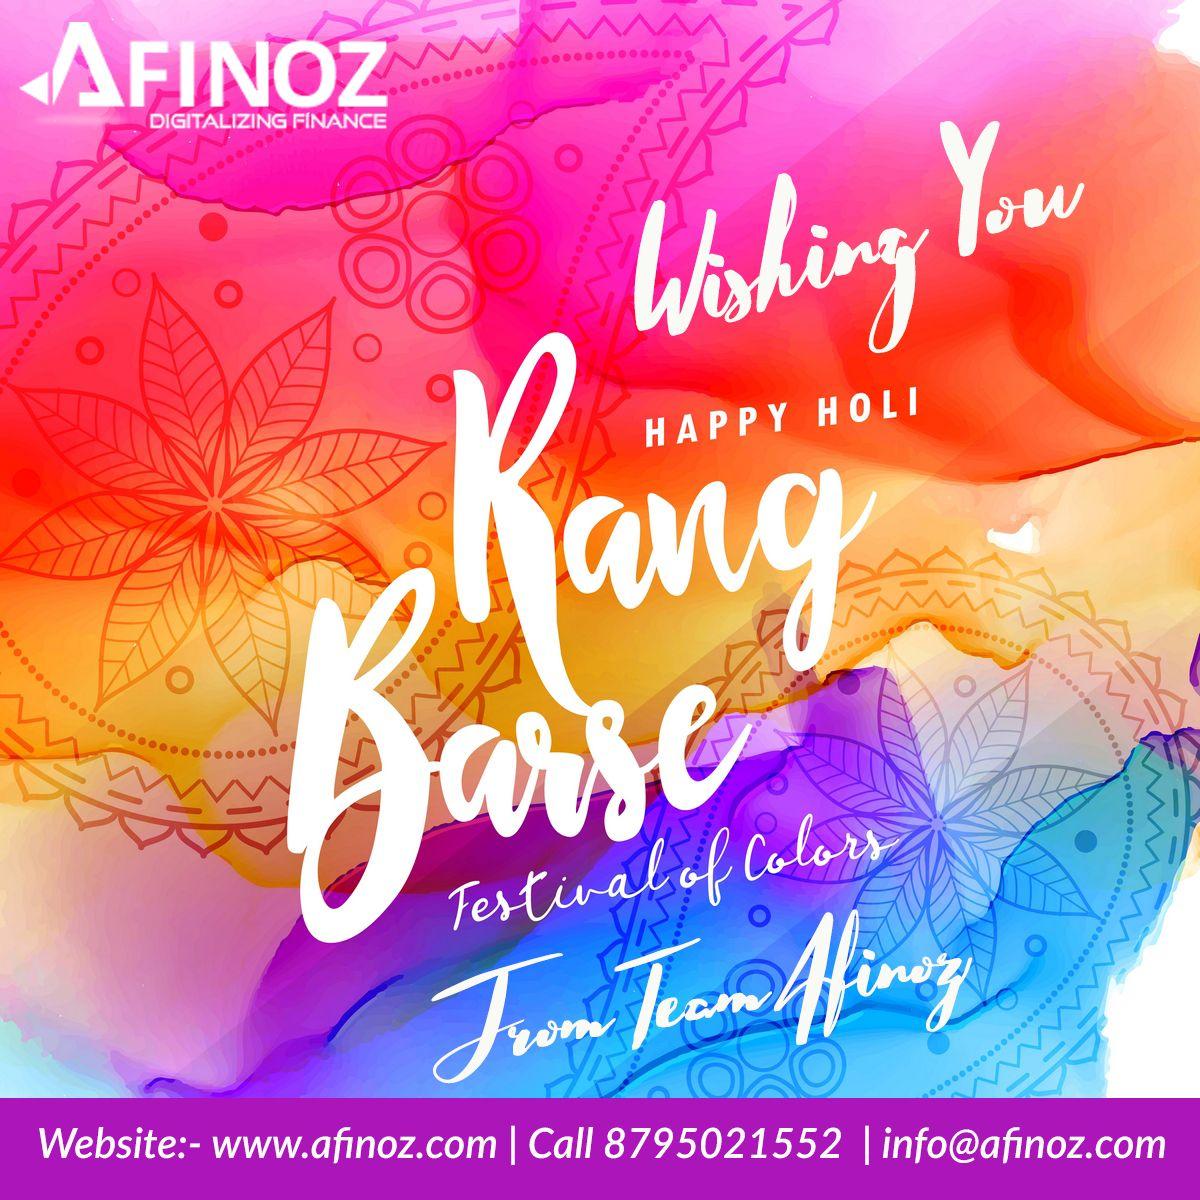 Afinoz wishing you & your family a very happy and prosperous Holi